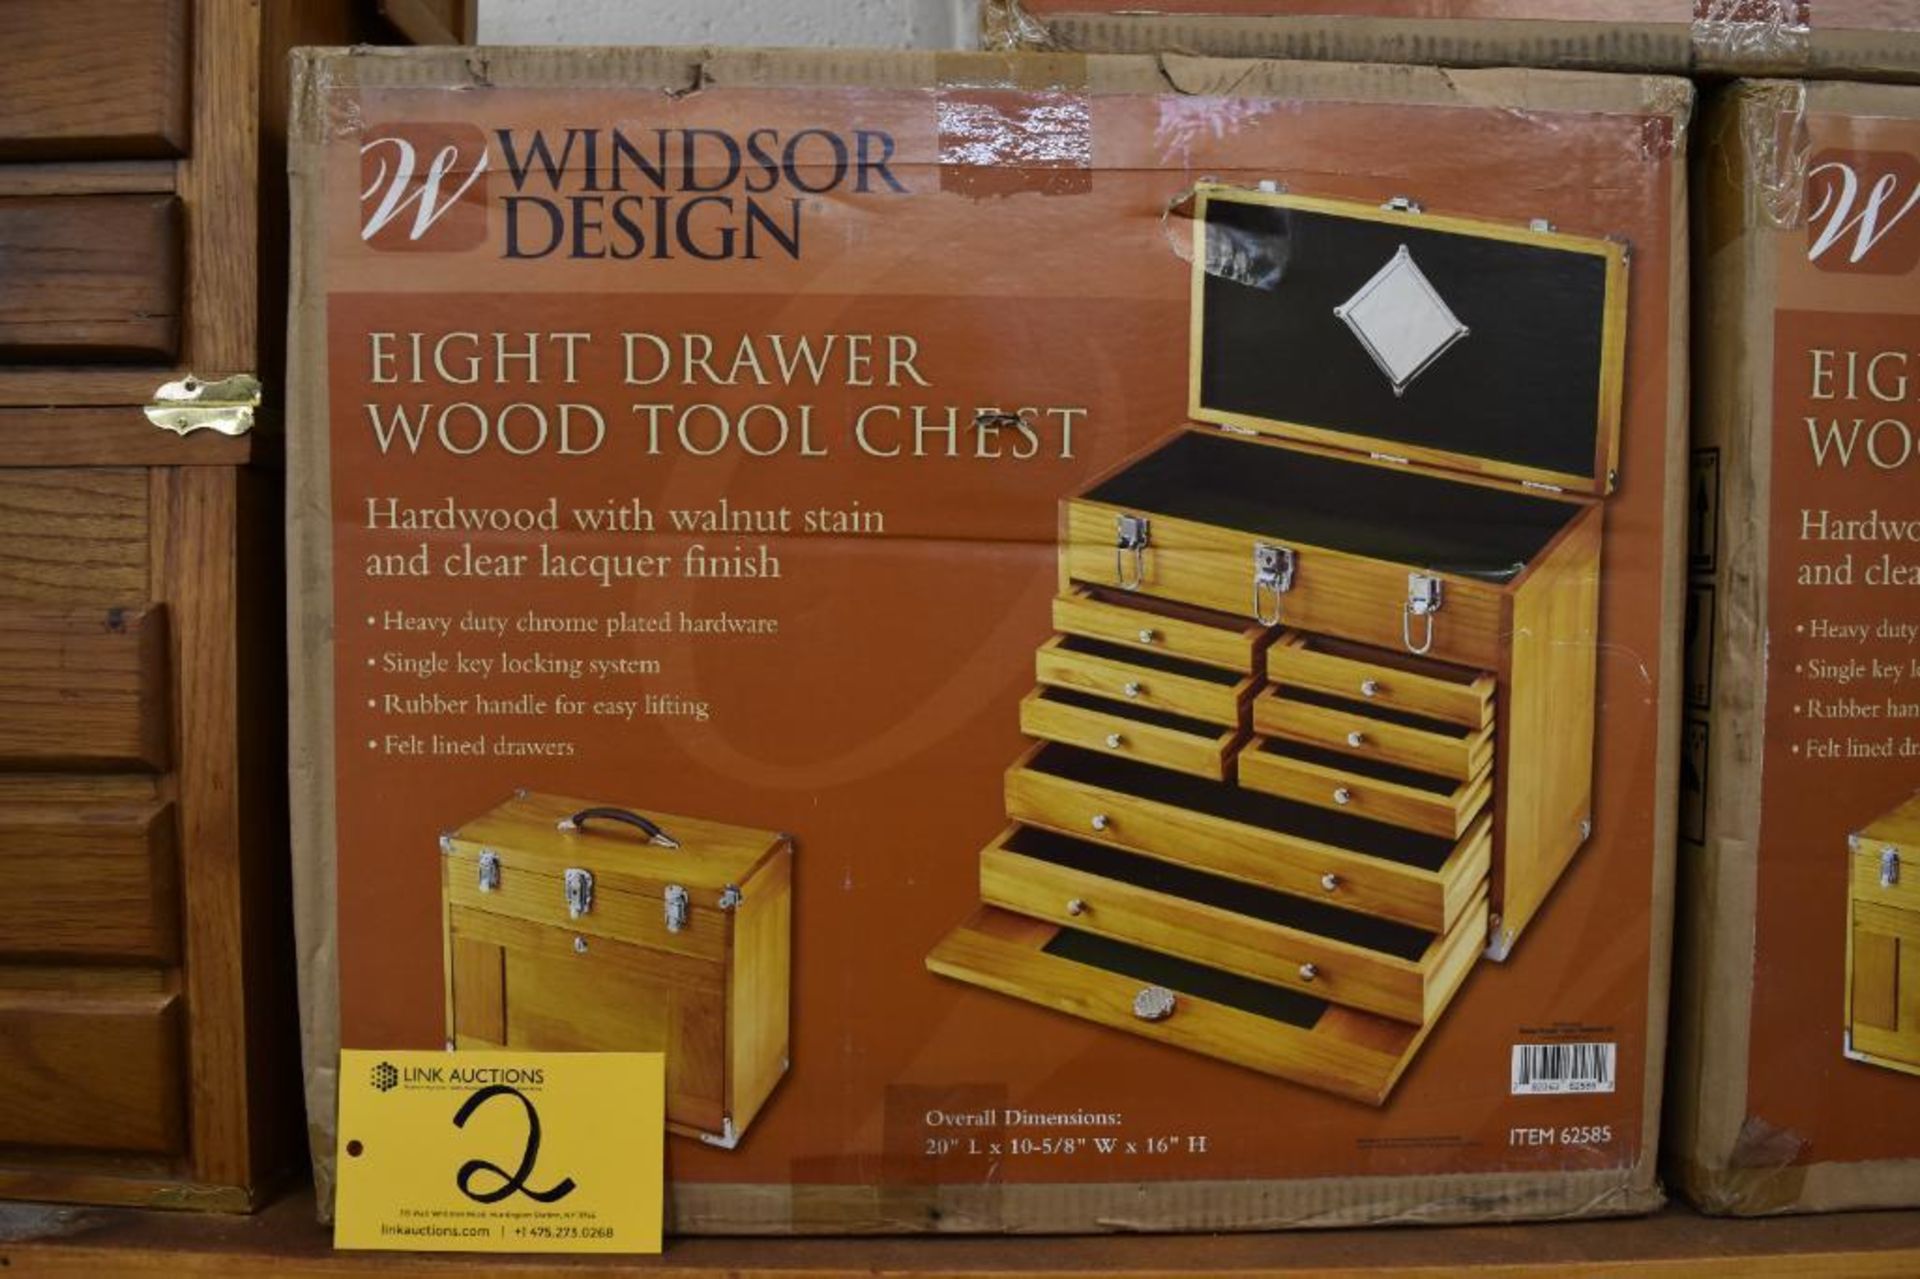 Windsor Design 8-Drawer Wood Tool Chest, 20" L x 10-5/8" W x 16" H, New in Box